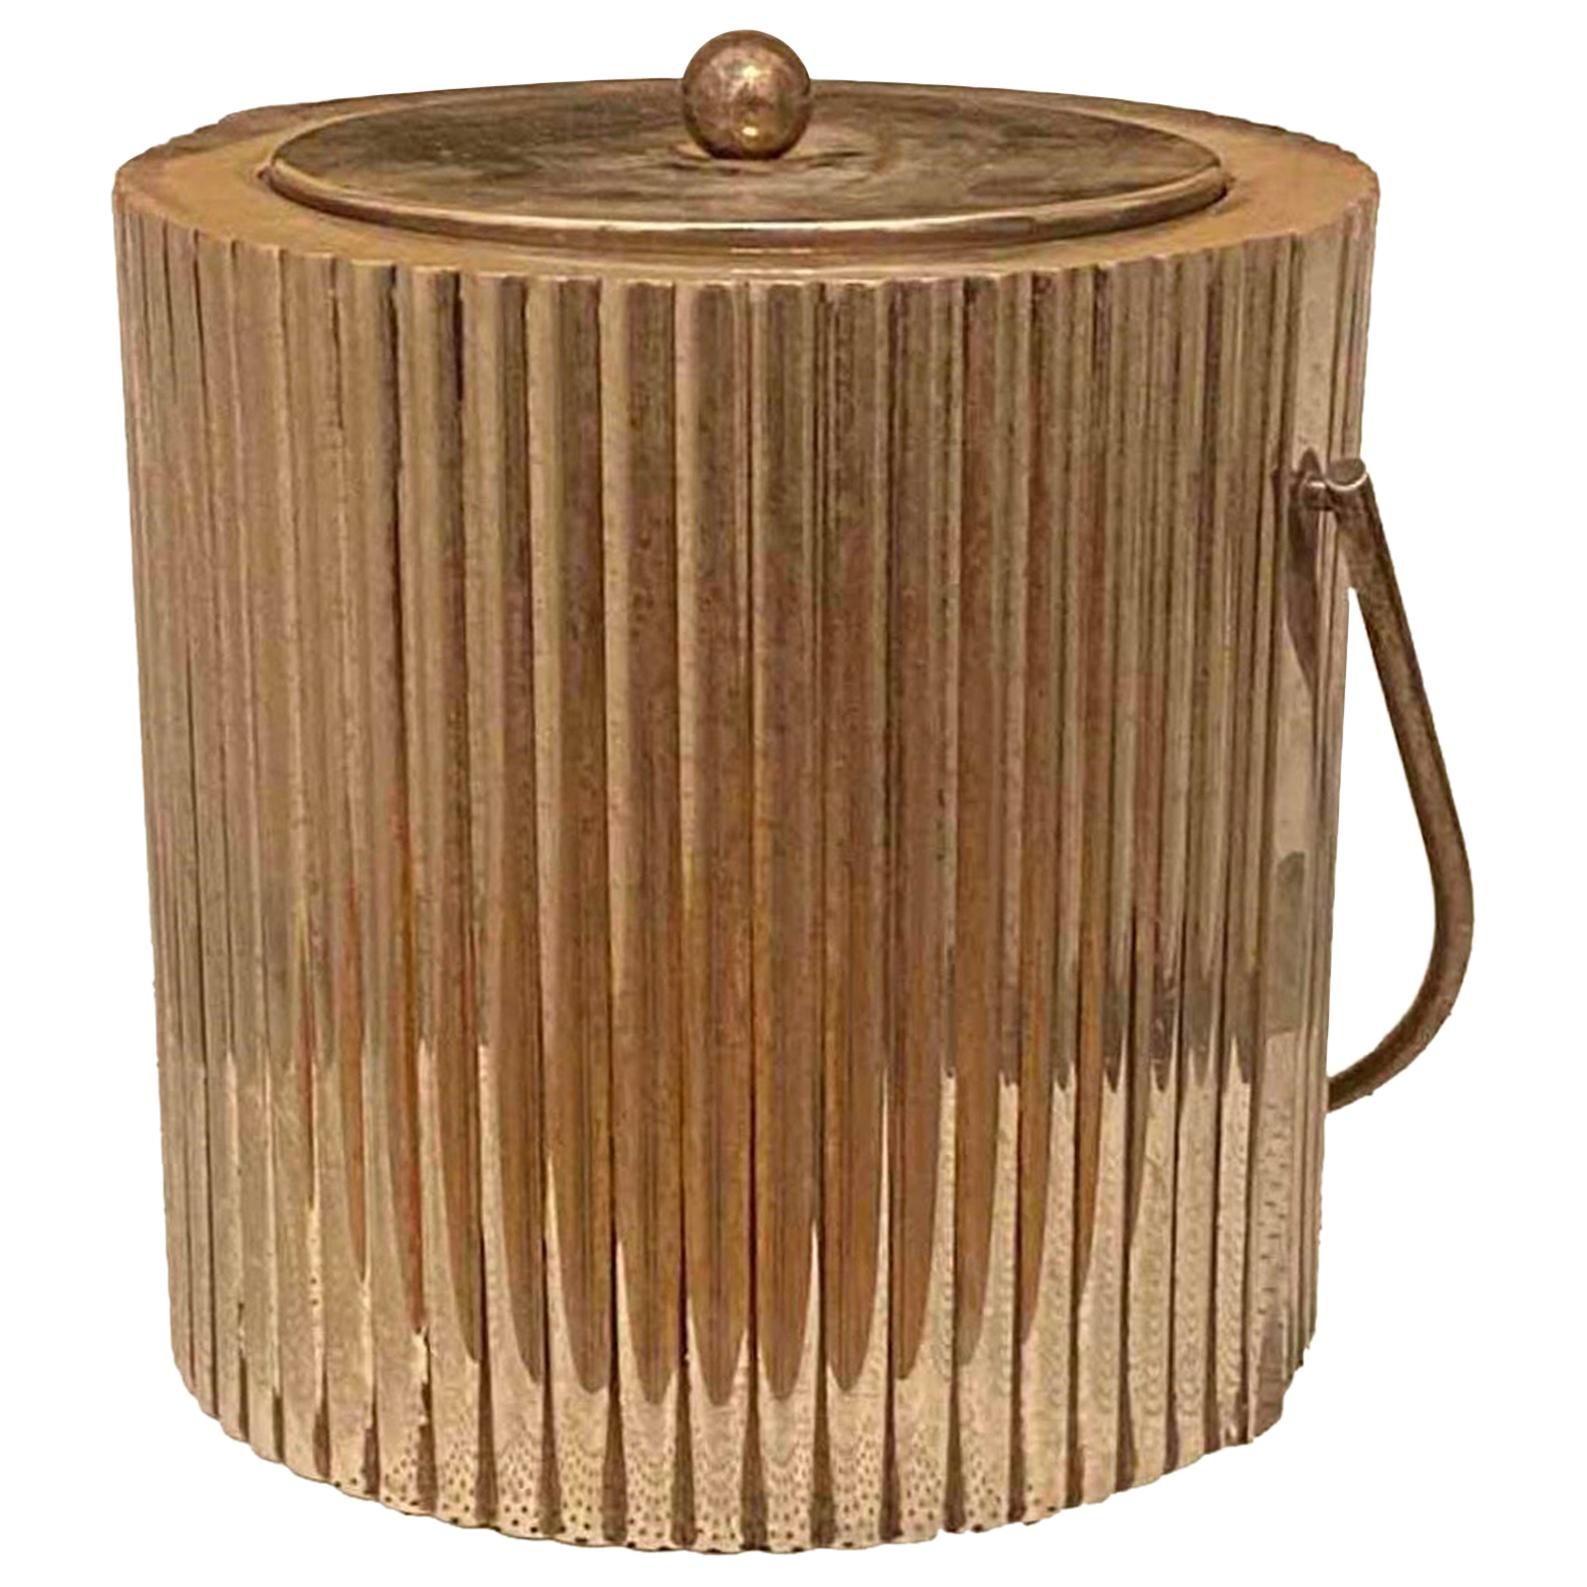 Handcrafted Secessionist Style Silver-Plated Ice Bucket from Cassetti, 1960s For Sale